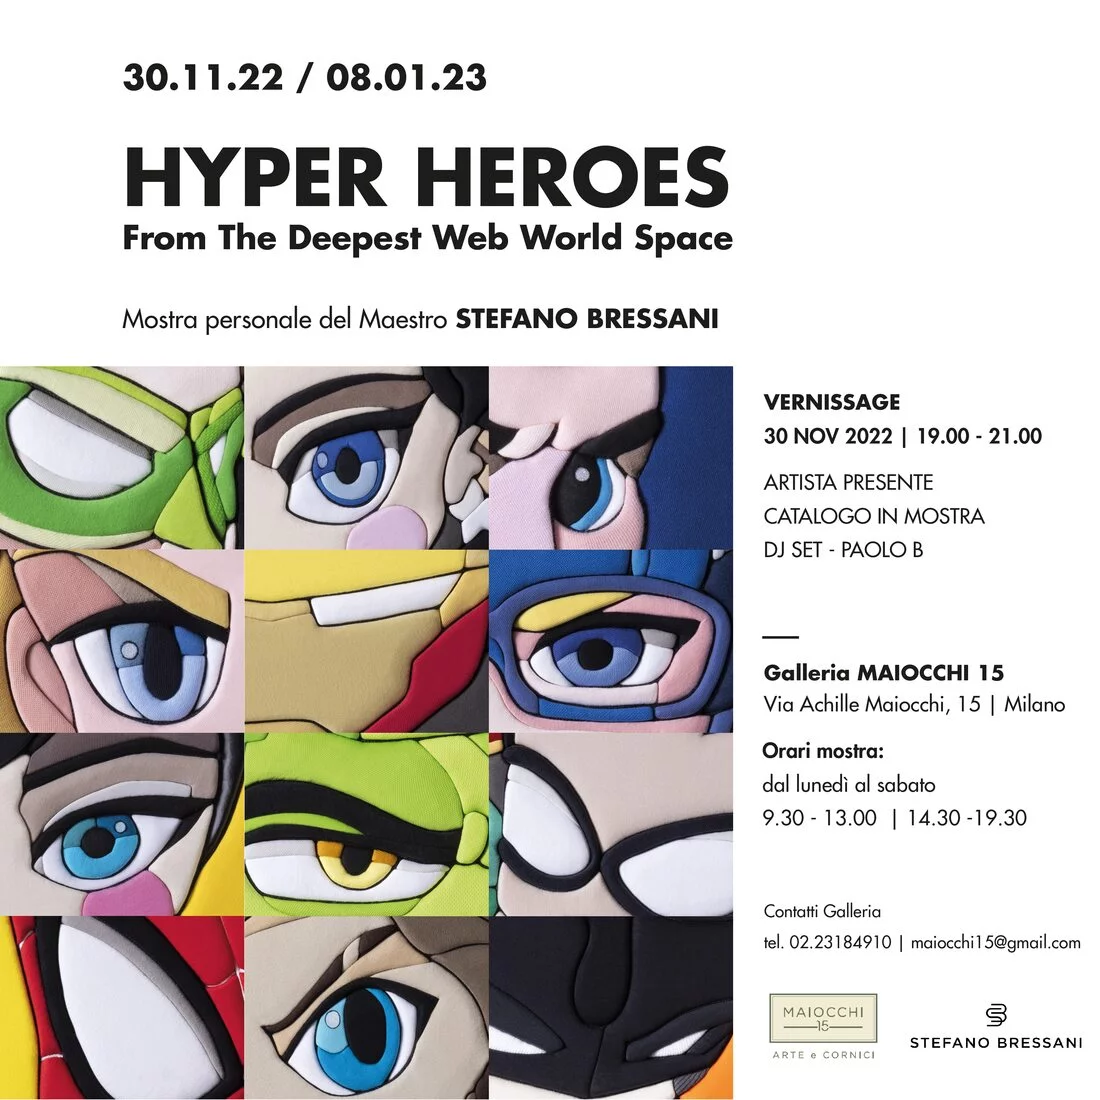 Stefano Bressani. HYPER HEROES - From the Deepest Web World